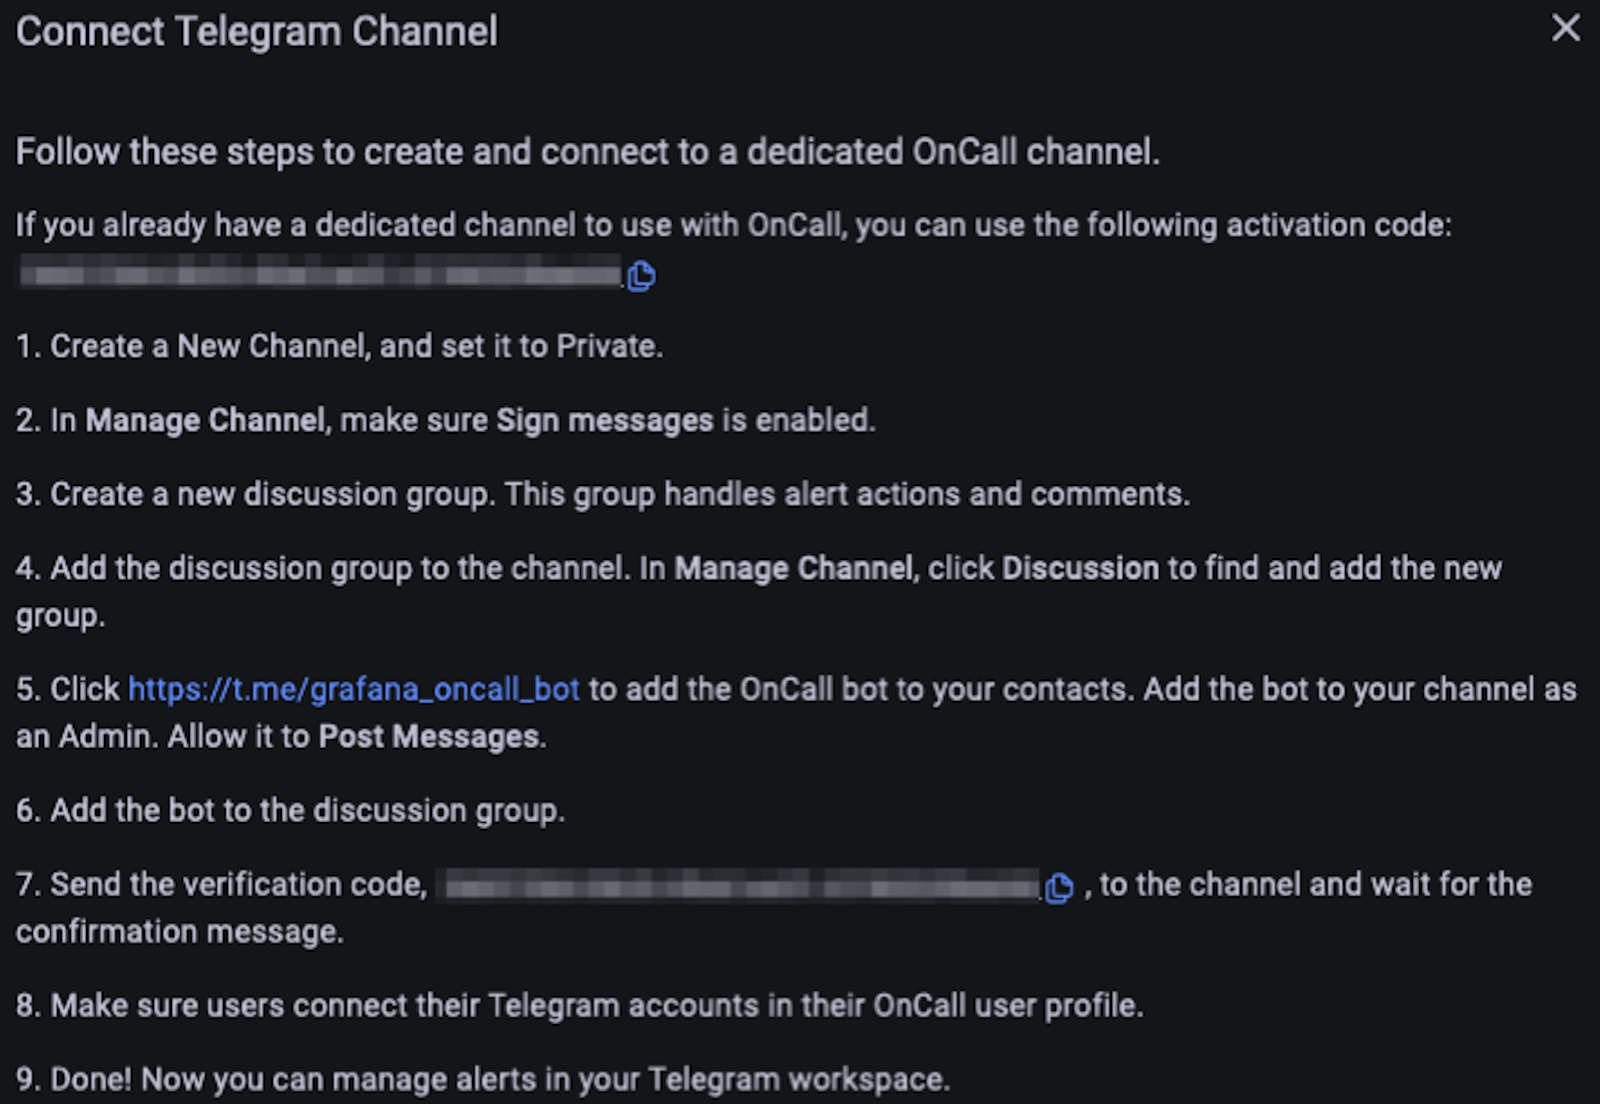 A screenshot of the steps to connect a Telegram channel in Grafana OnCall.